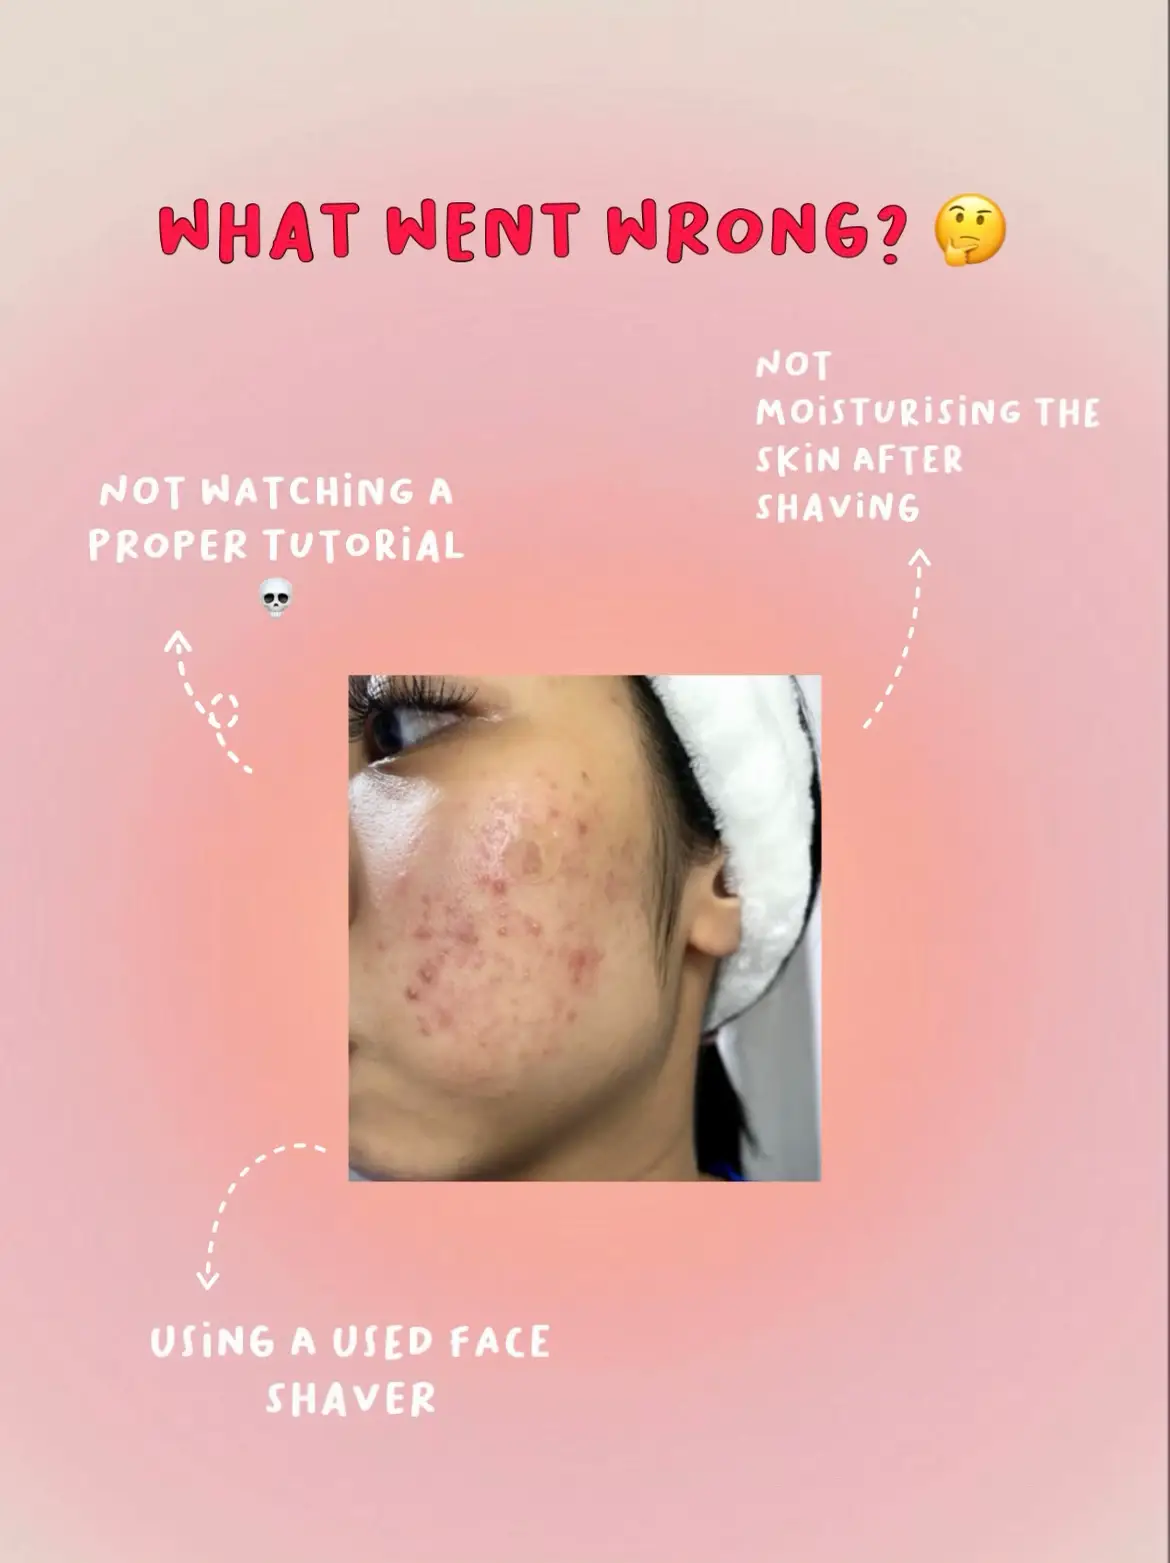 THIS BEAUTY TREND RUINED MY SKIN 😭's images(4)